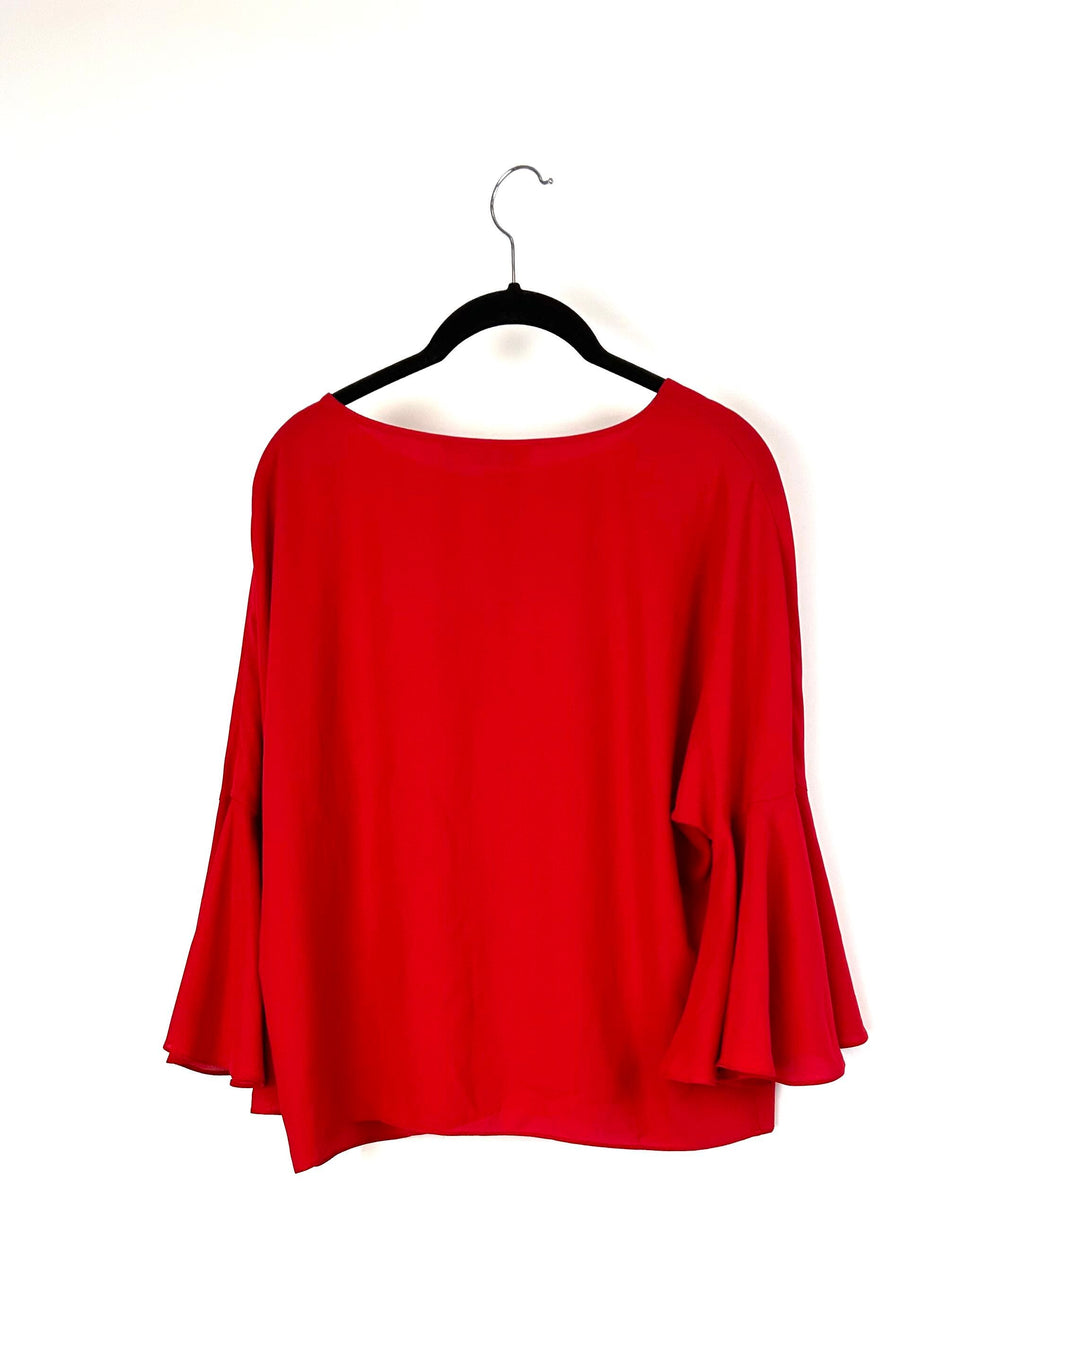 Red Bell Sleeve Blouse - Size 4/6